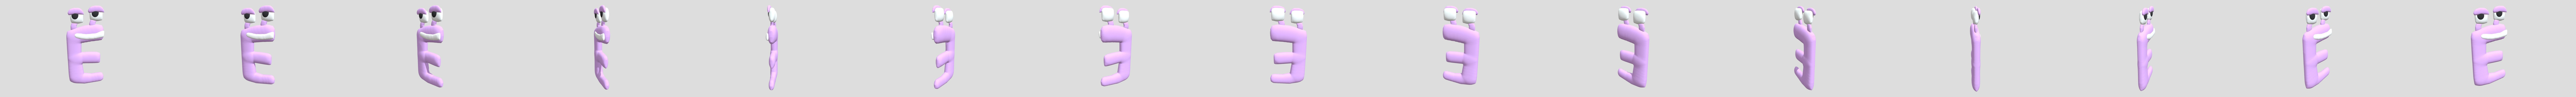 Harrymations Russian Alphabet Lore - A 3D model collection by Hache  (@salhache) - Sketchfab